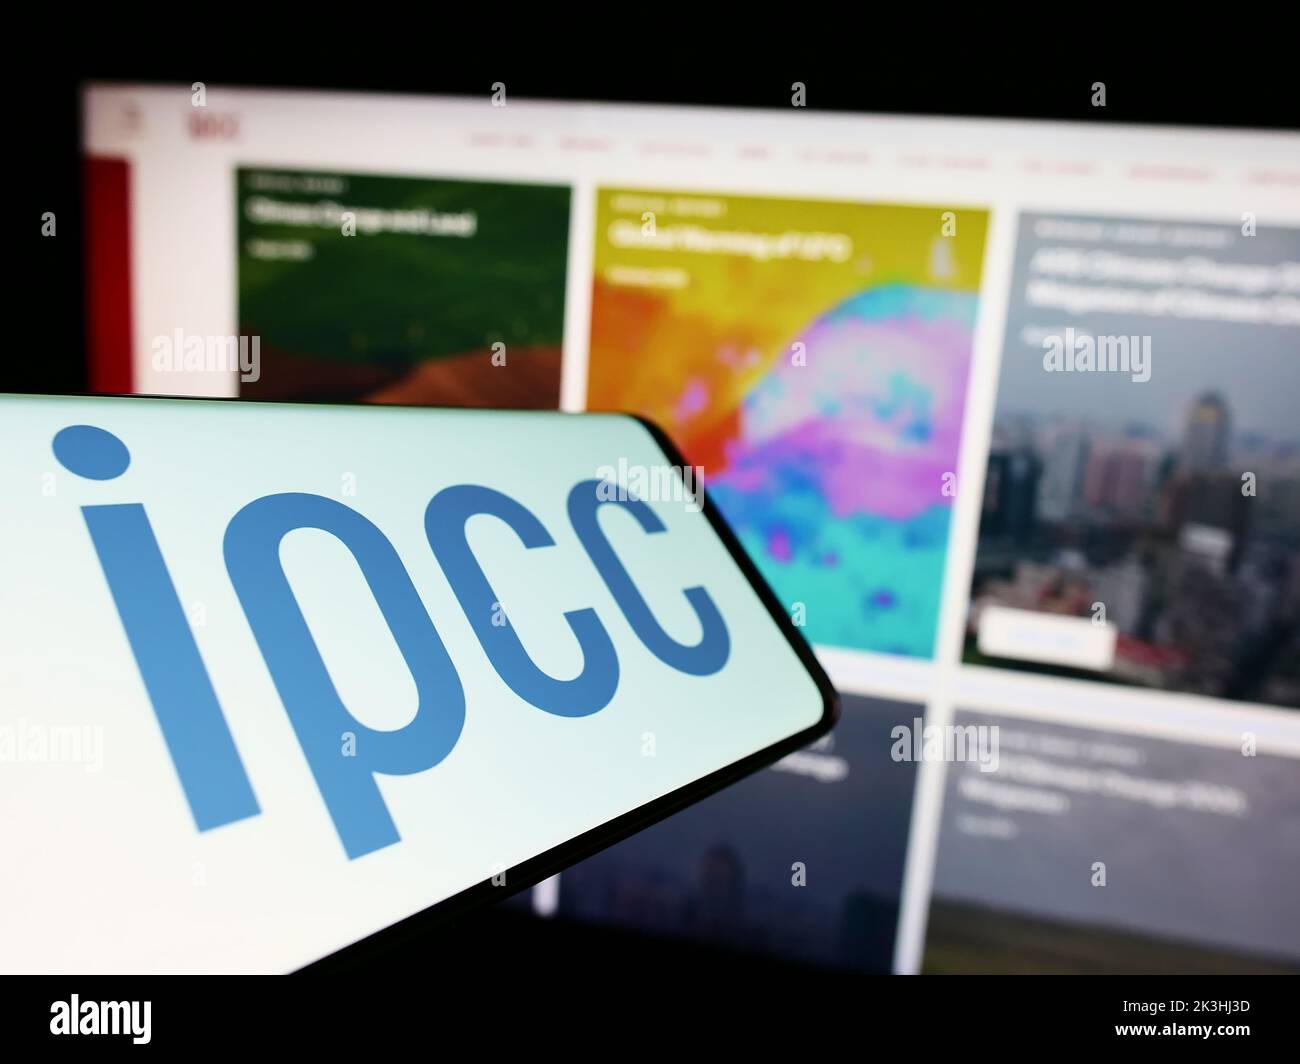 Smartphone with logo of Intergovernmental Panel on Climate Change (IPCC) on screen in front of website. Focus on center of phone display. Stock Photo